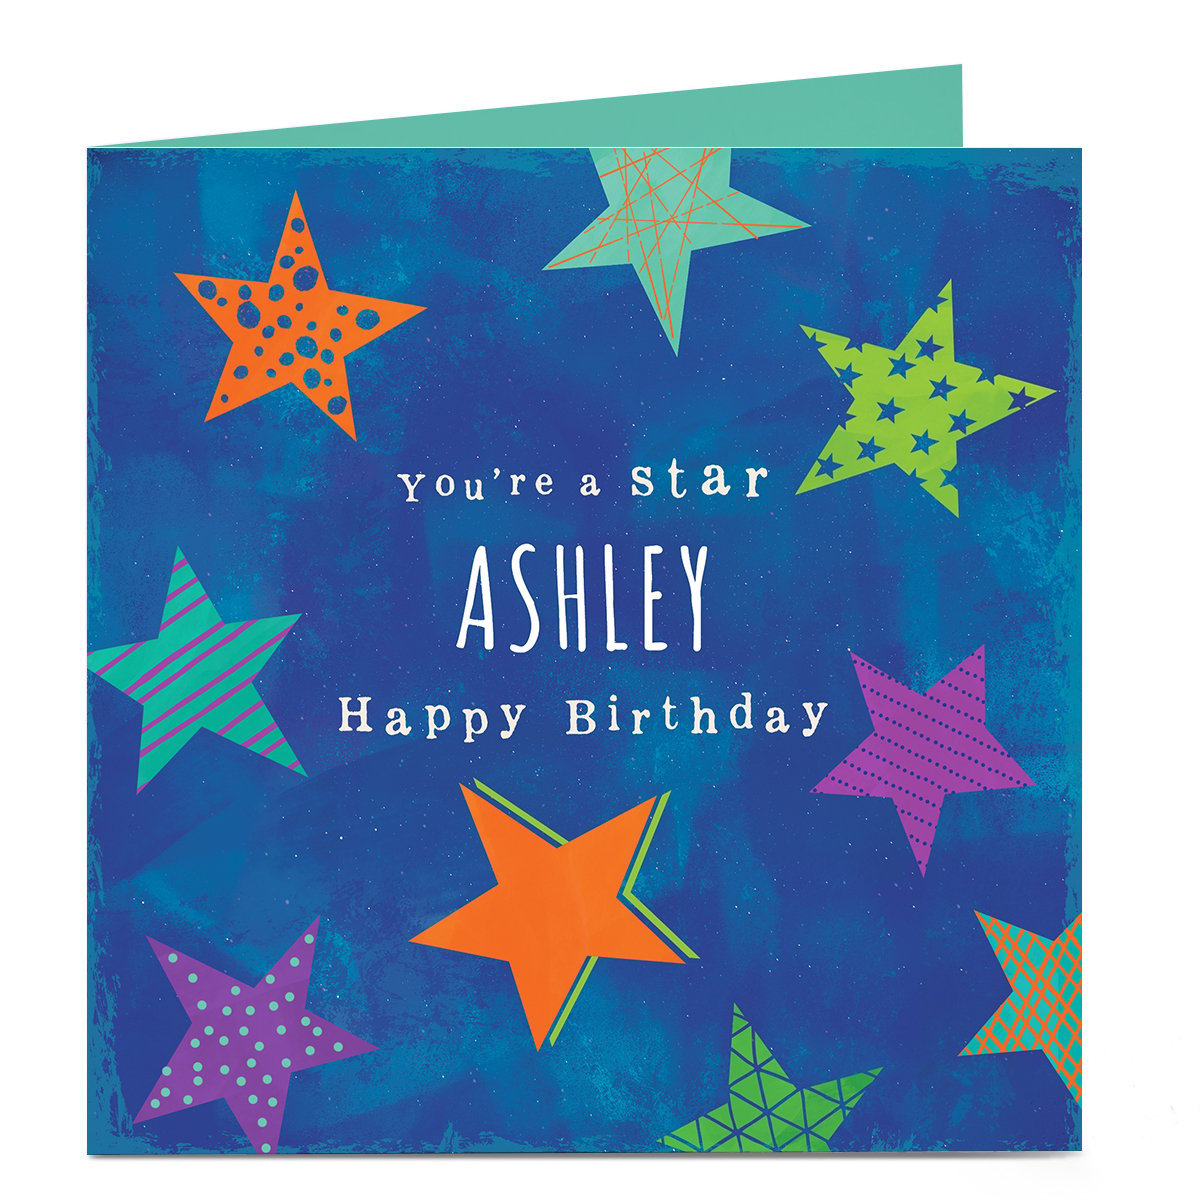 Personalised Birthday Card - You're A Star!